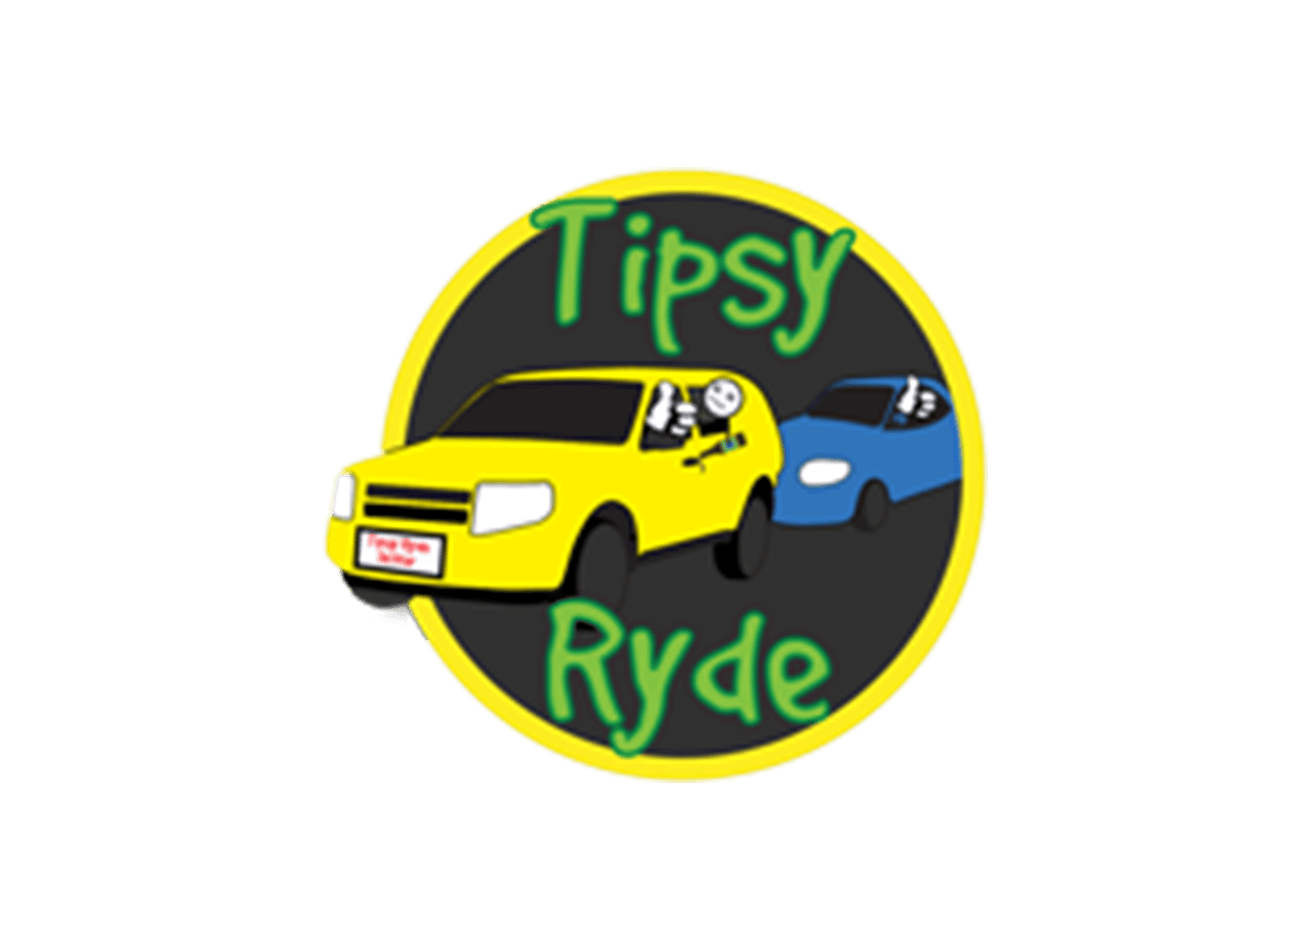 Tipsyryde Driver Assist และ Curbside Delivery